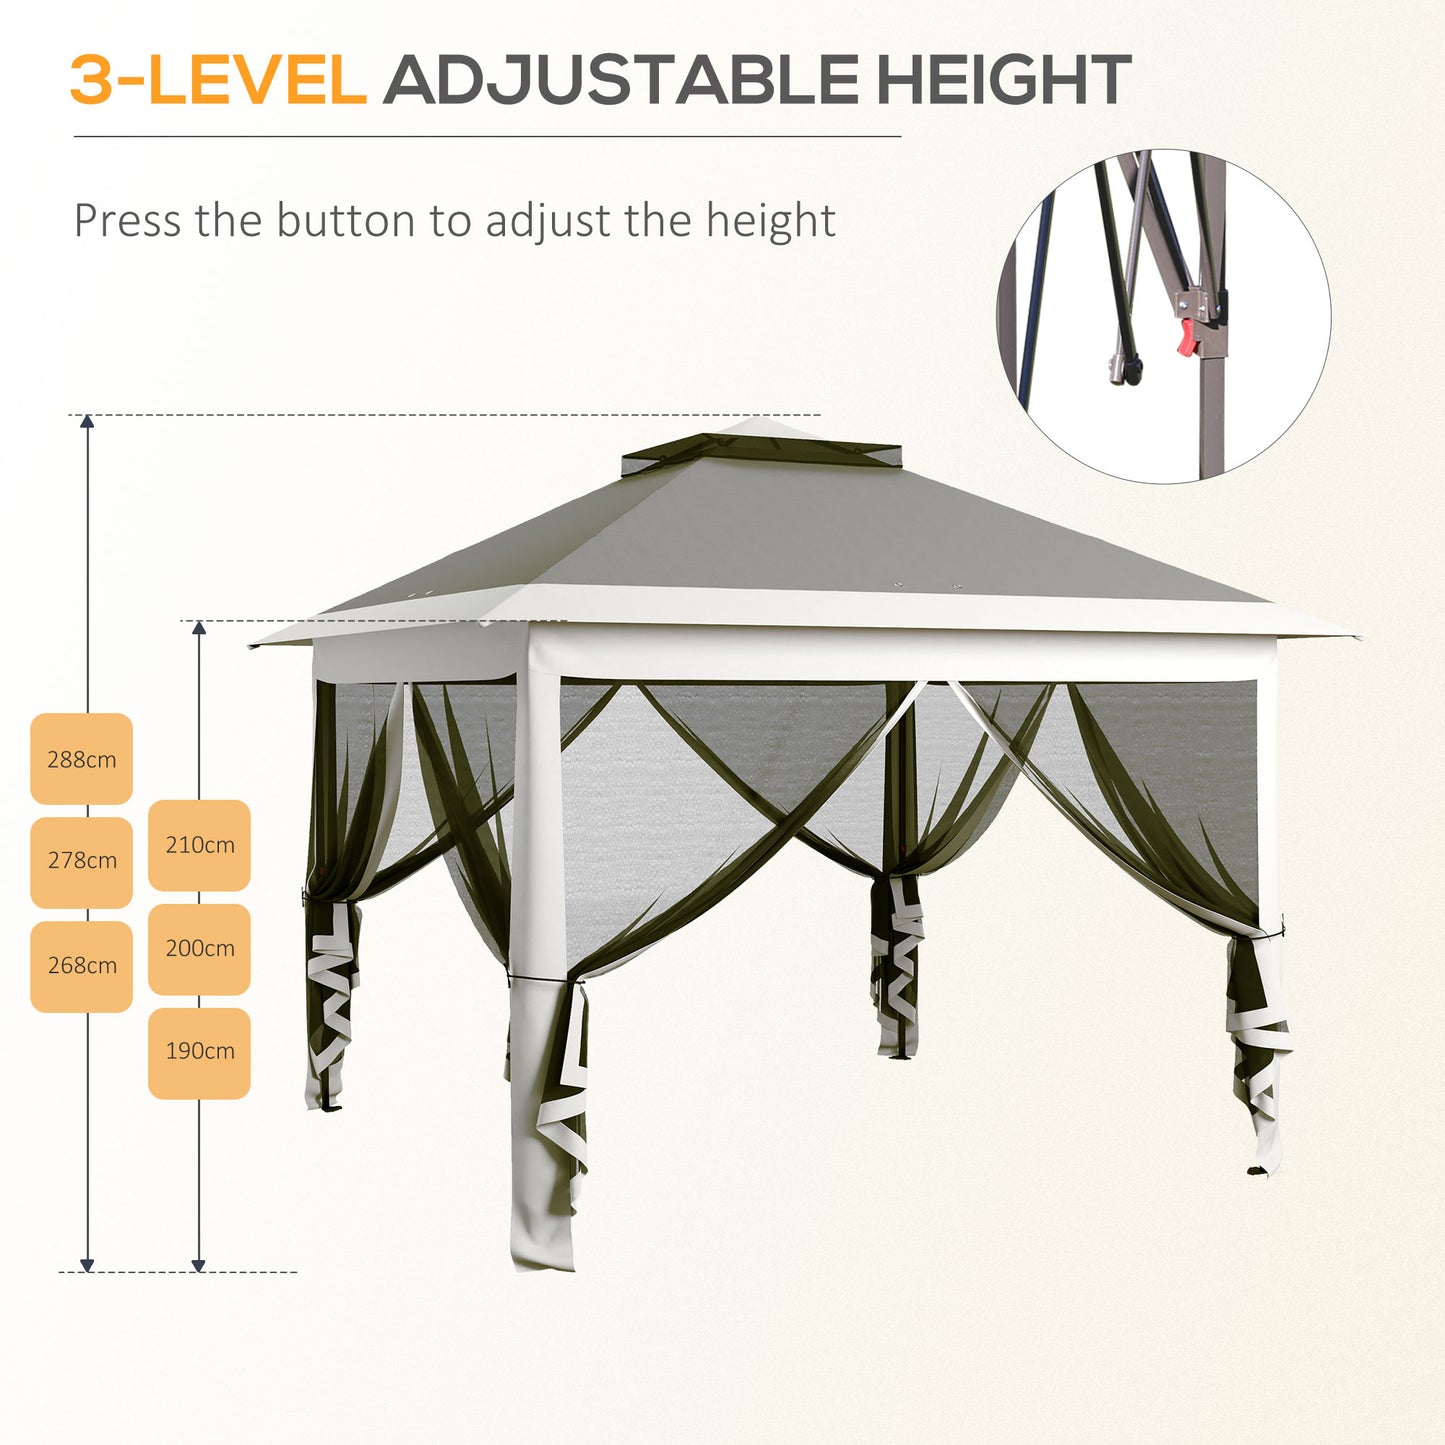 Outsunny Pop Up Canopy Tent with Double Roof, Zipped Mesh Sidewalls, Carrying Bag, Height Adjustable for Patio Garden, Dark Grey